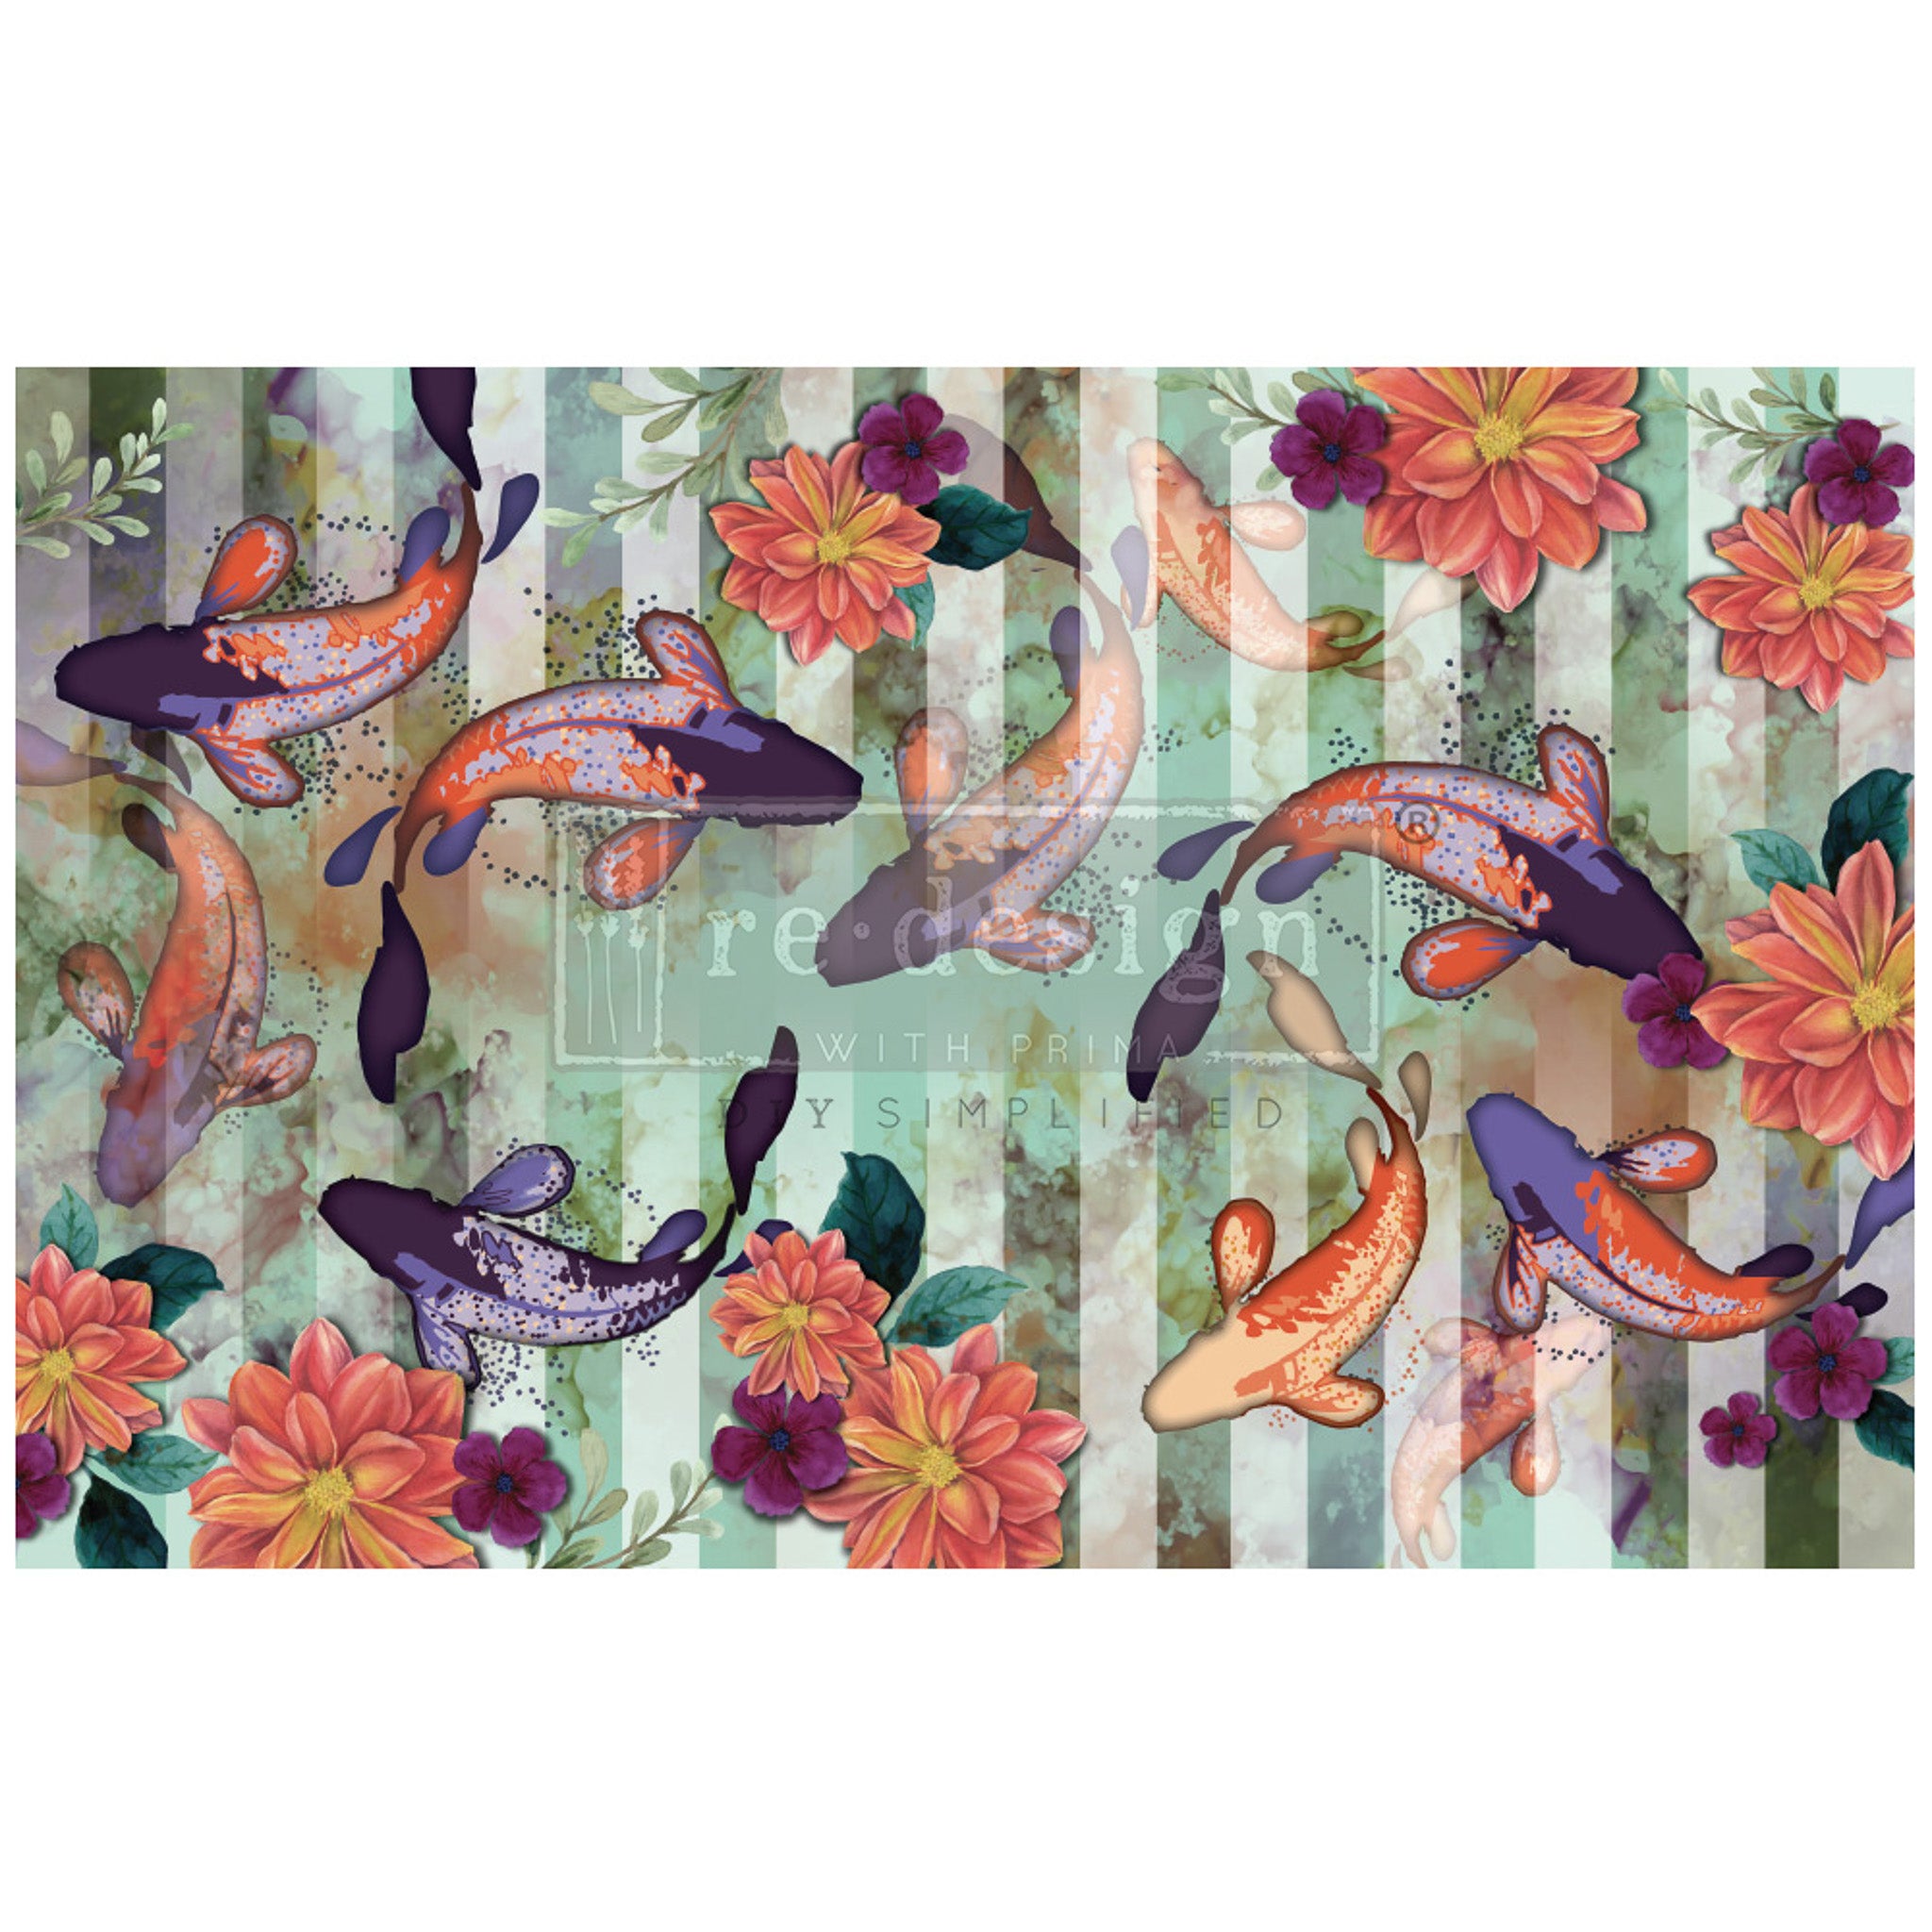 Tissue paper design featuring a playful striped background and whimsical images of koi fish swimming among water lilies.